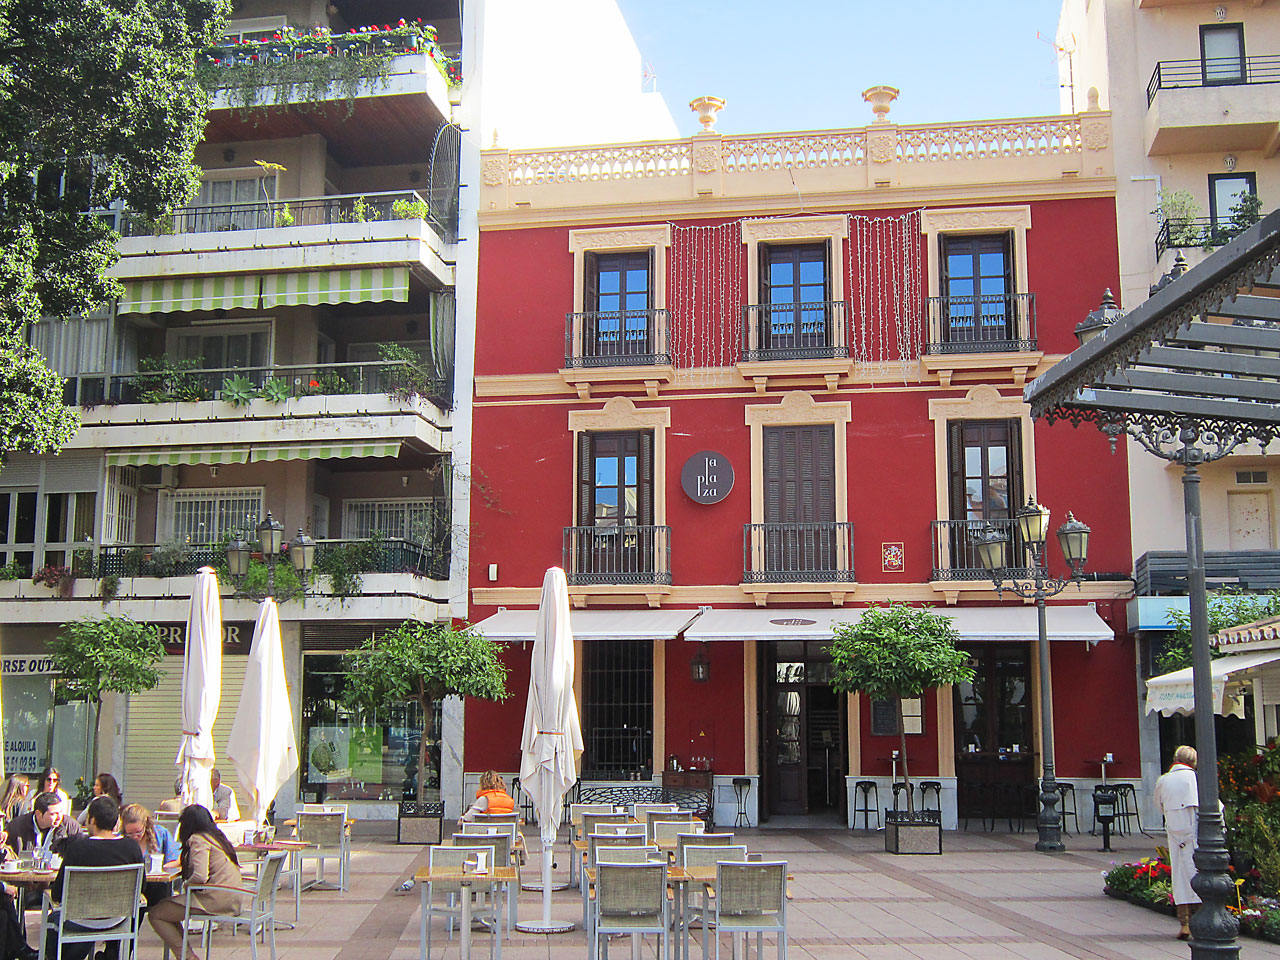 Plaza de la Constitution with its many eateries, cafes and bars